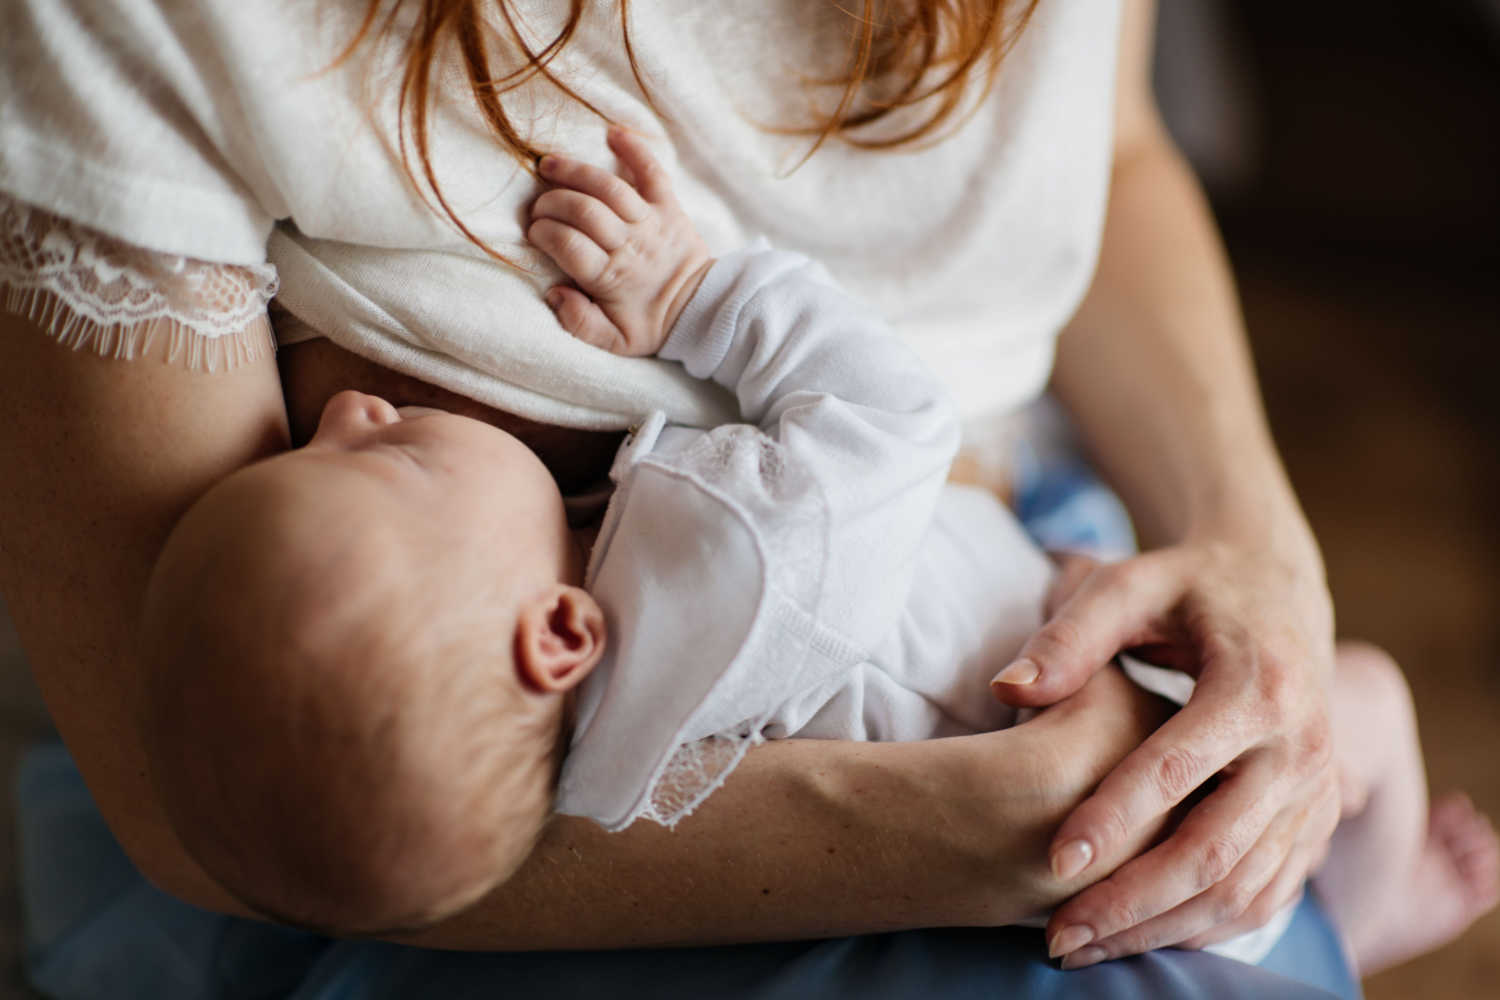 Breastfeeding after IVF - Tips to cope